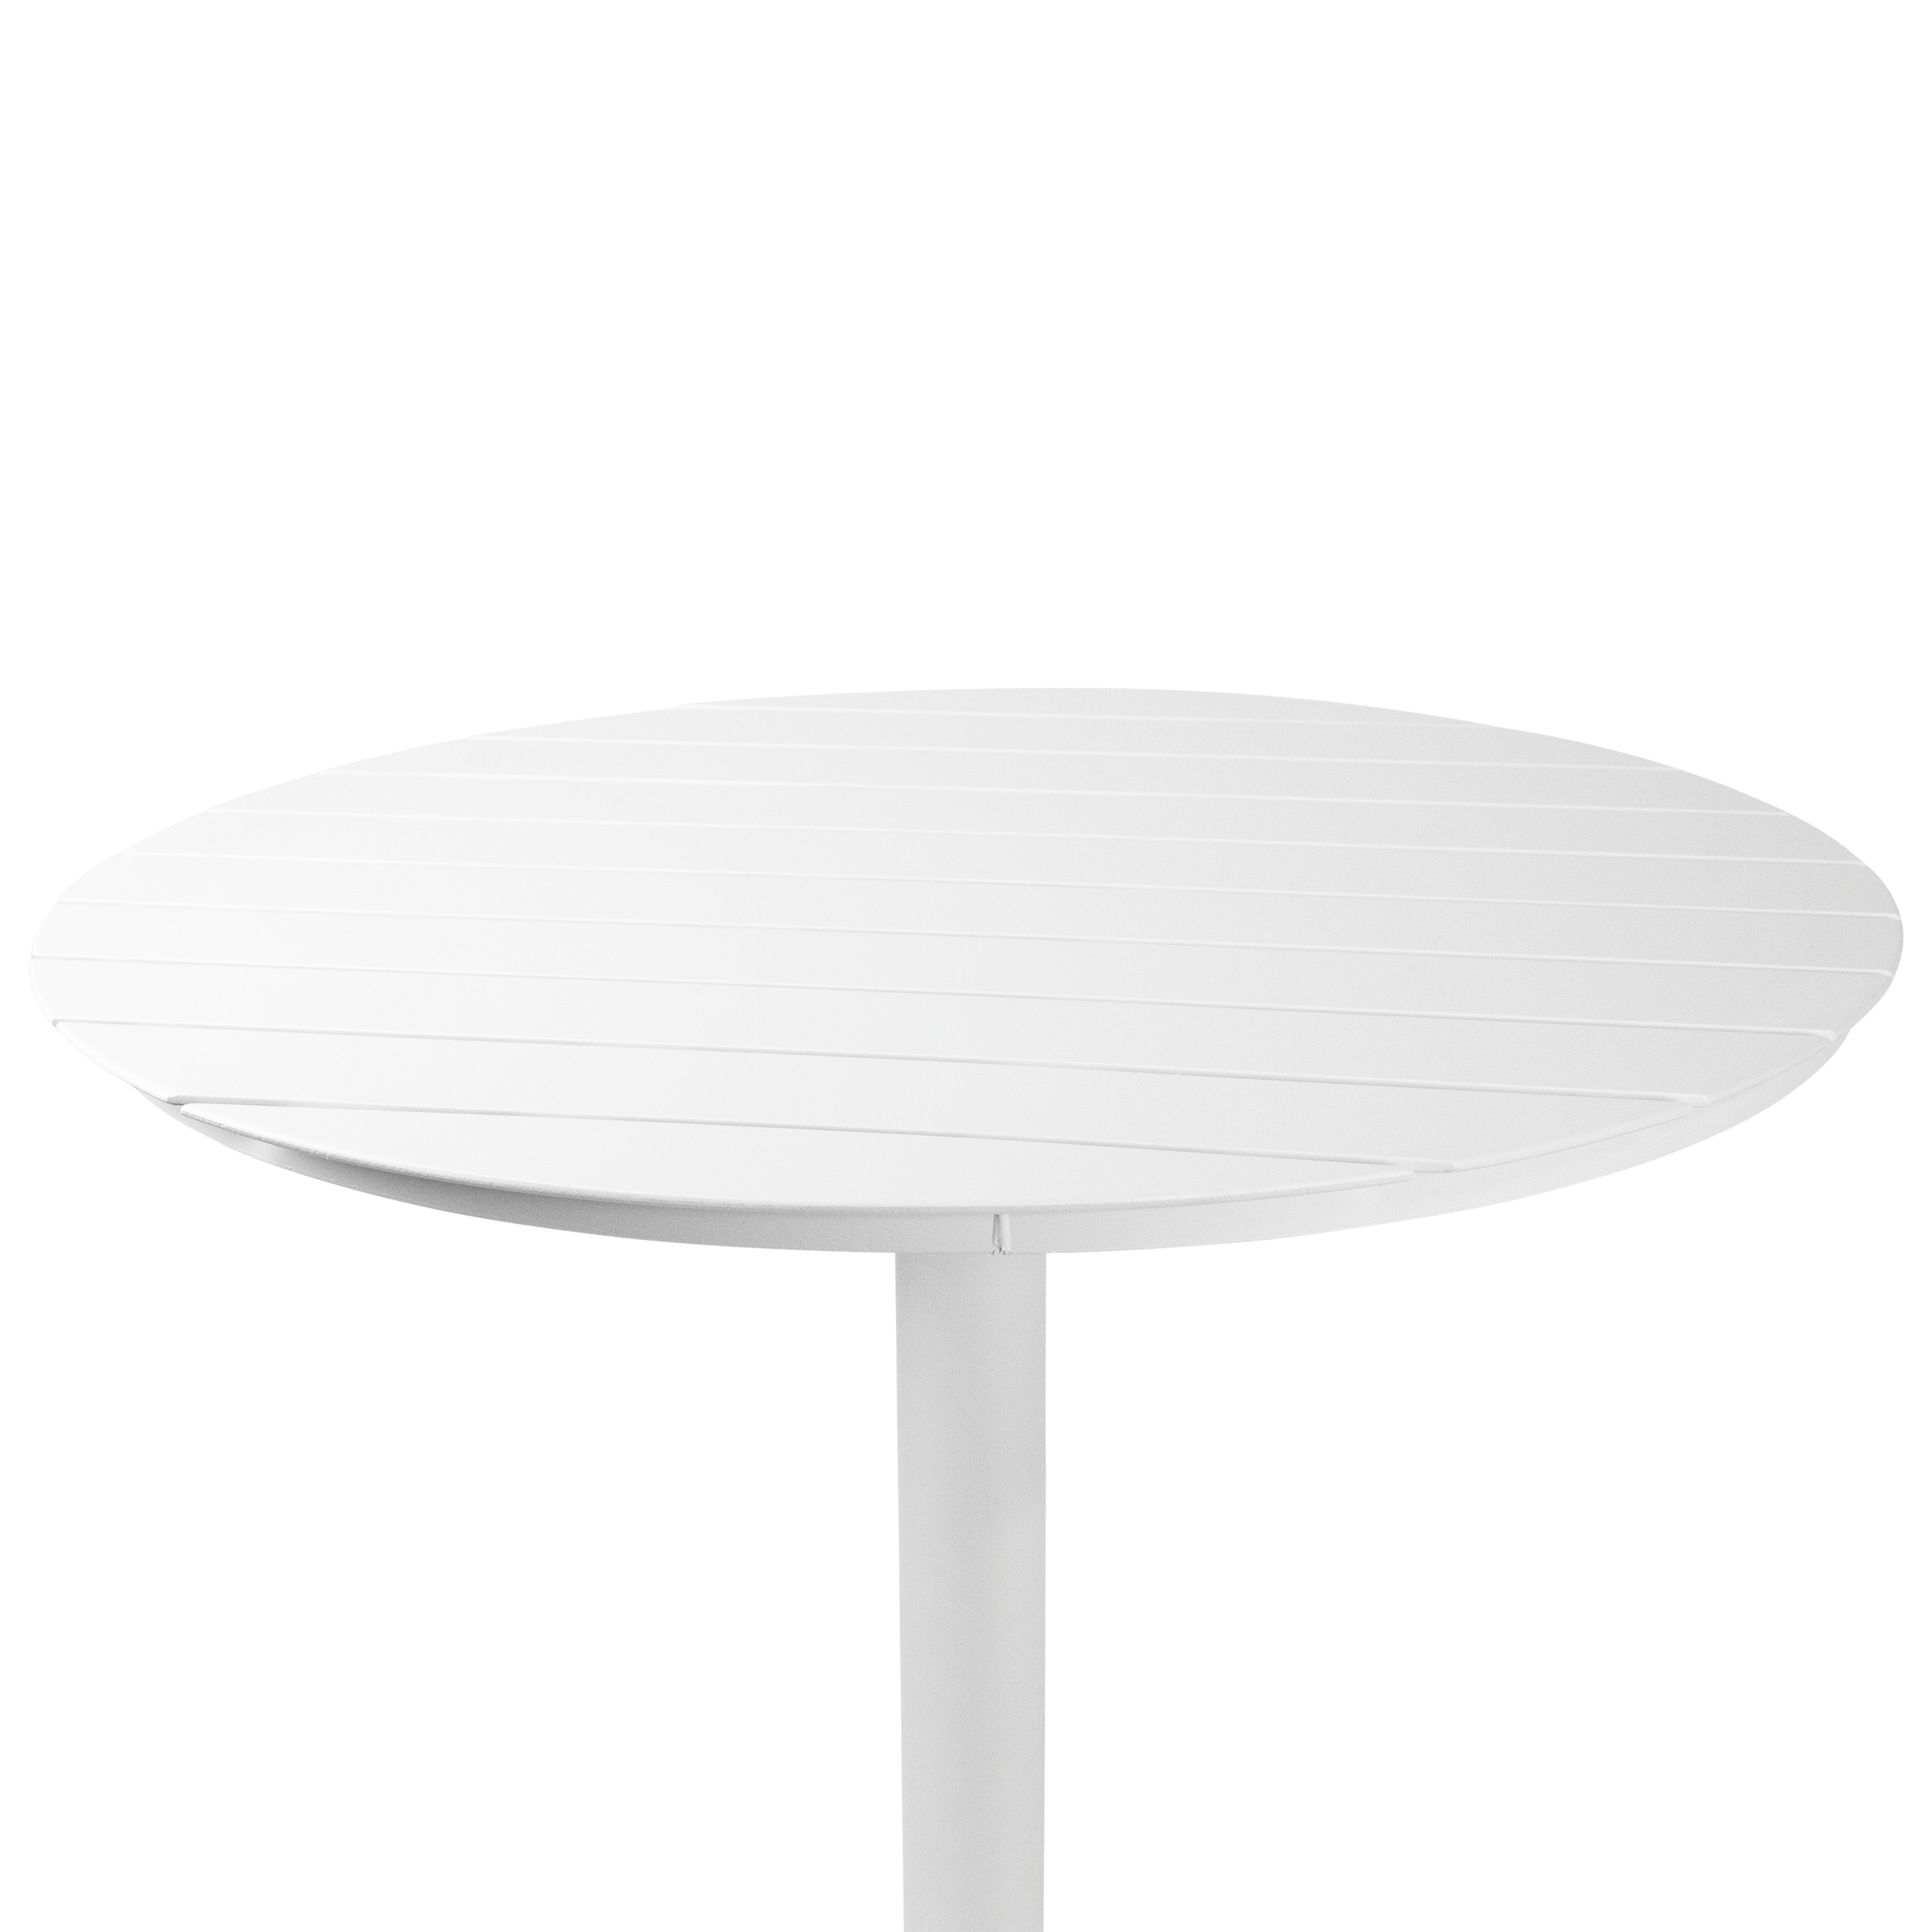 Cafe Collection Round Dining Table in Aluminium and Steel Base in Arctic White